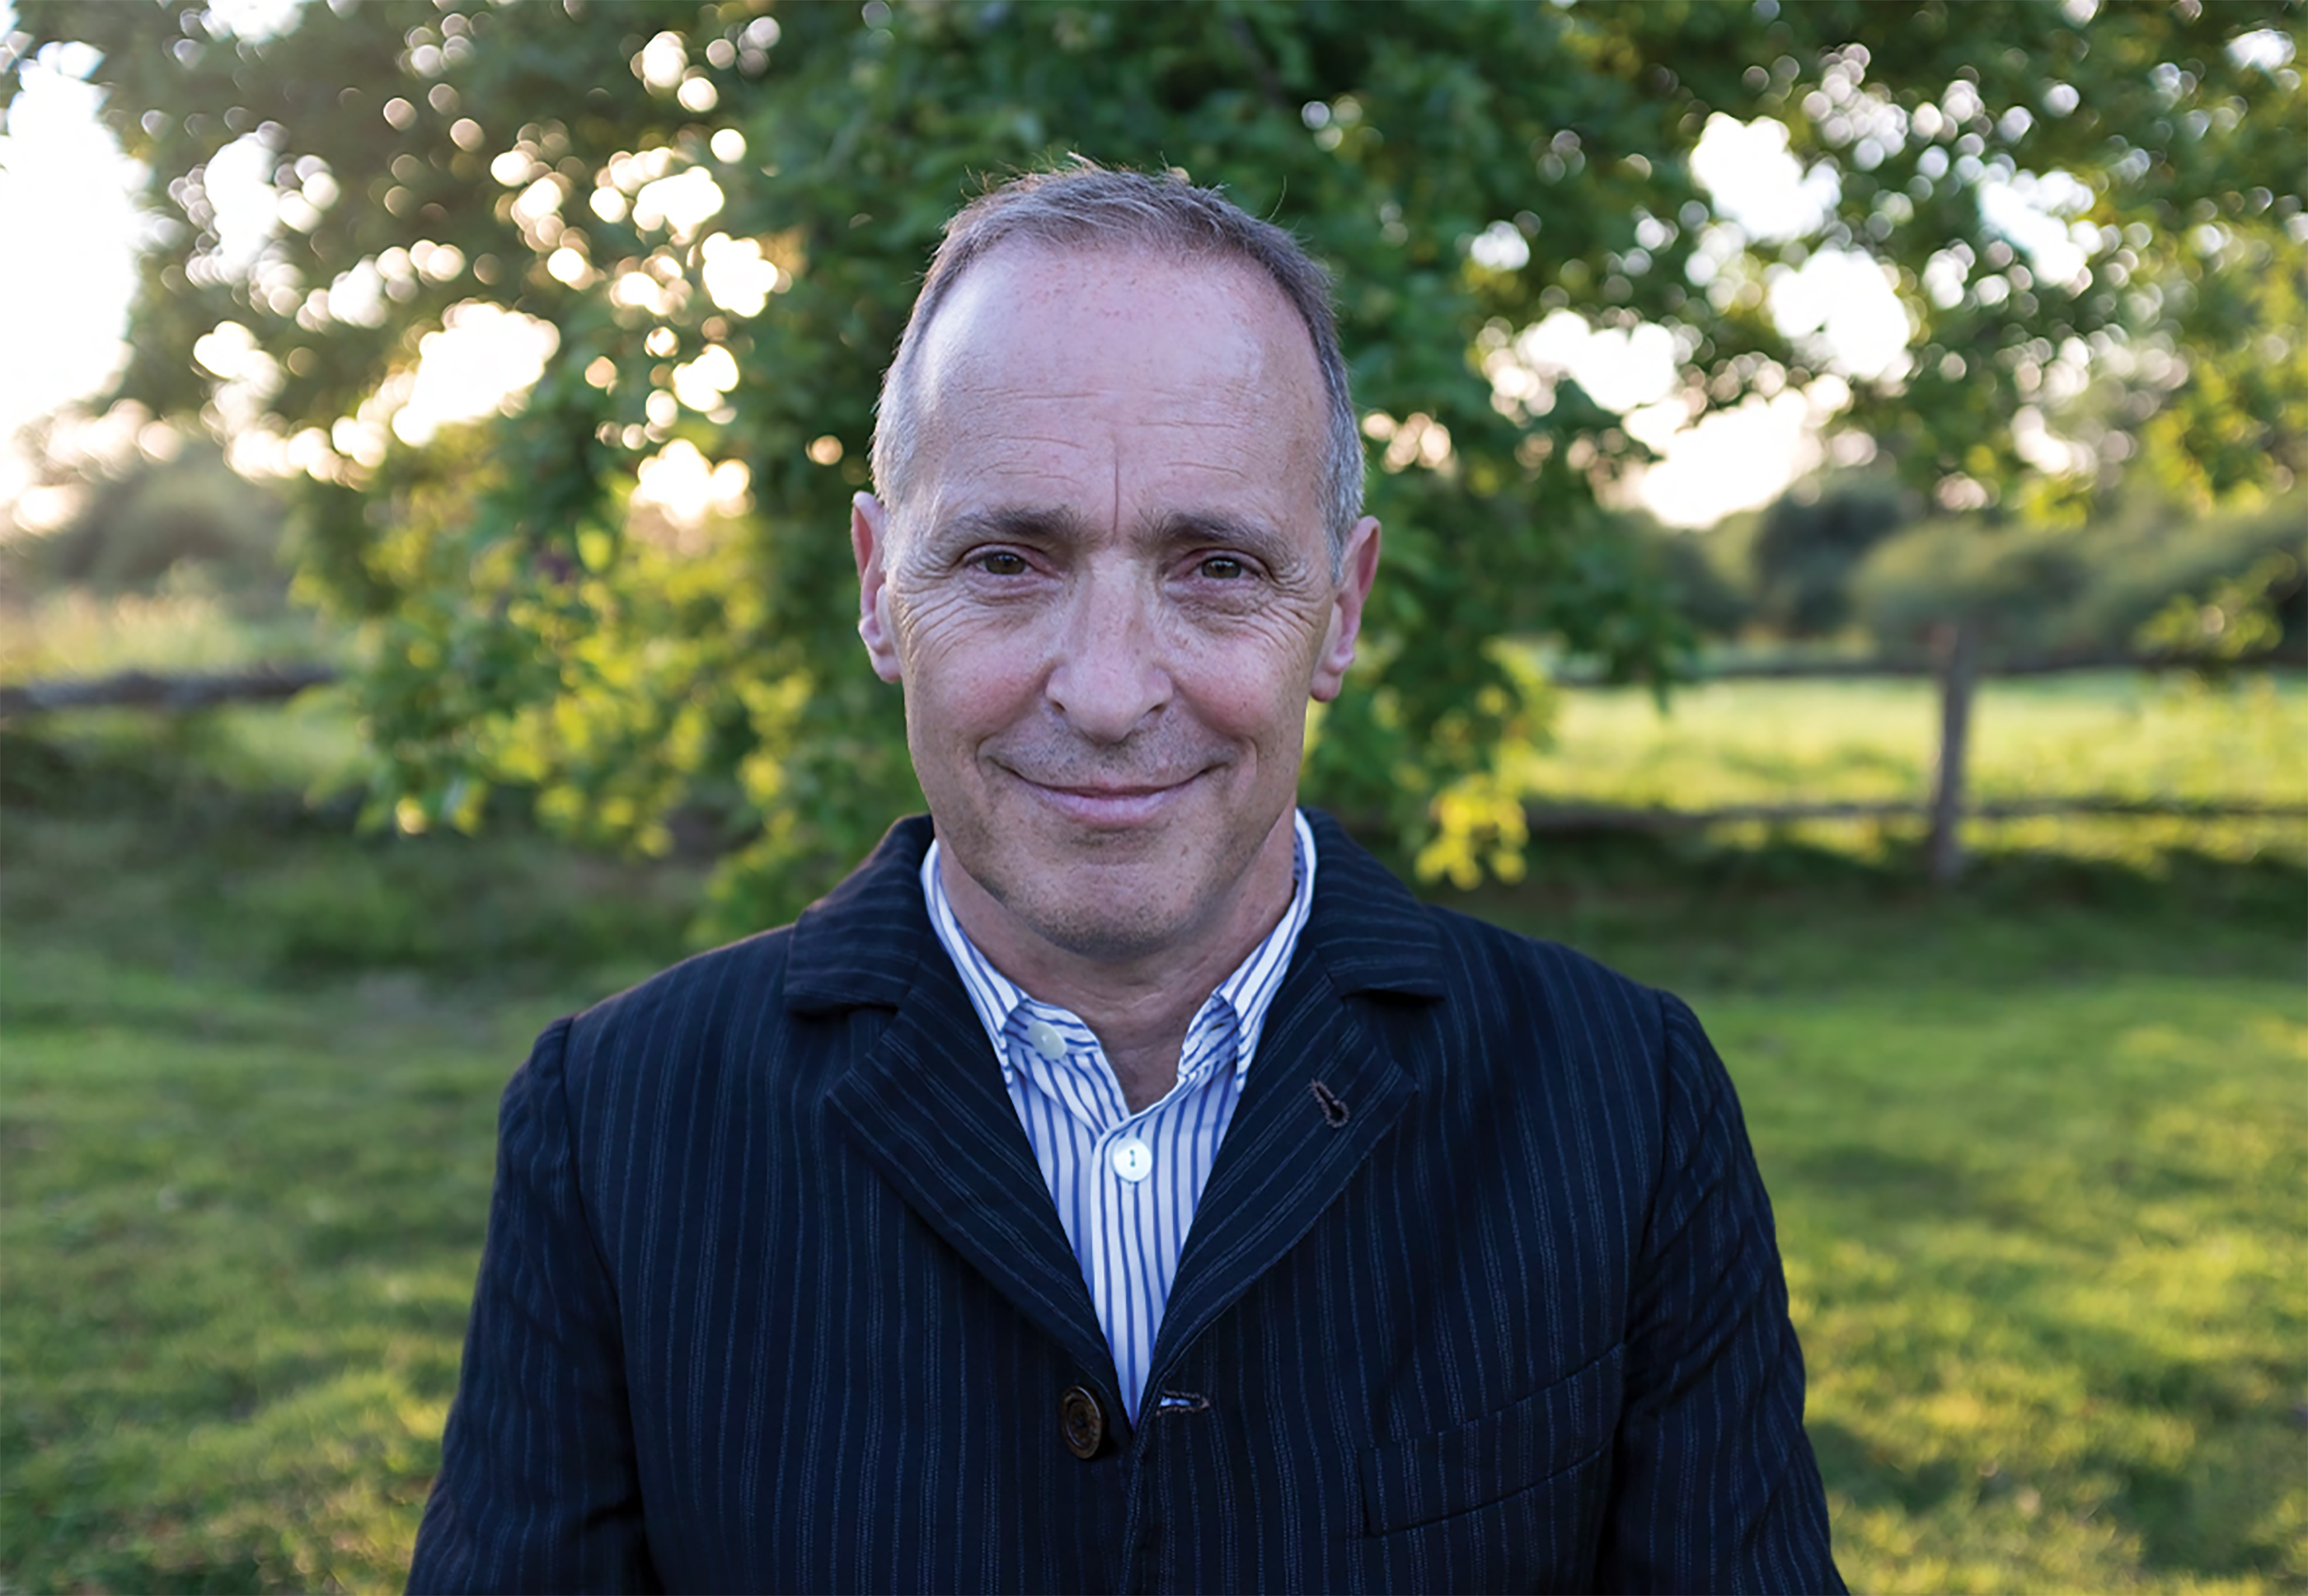 David Sedaris Loves Being Rich and Would Enjoy Telling You How Much His Shirt Cost